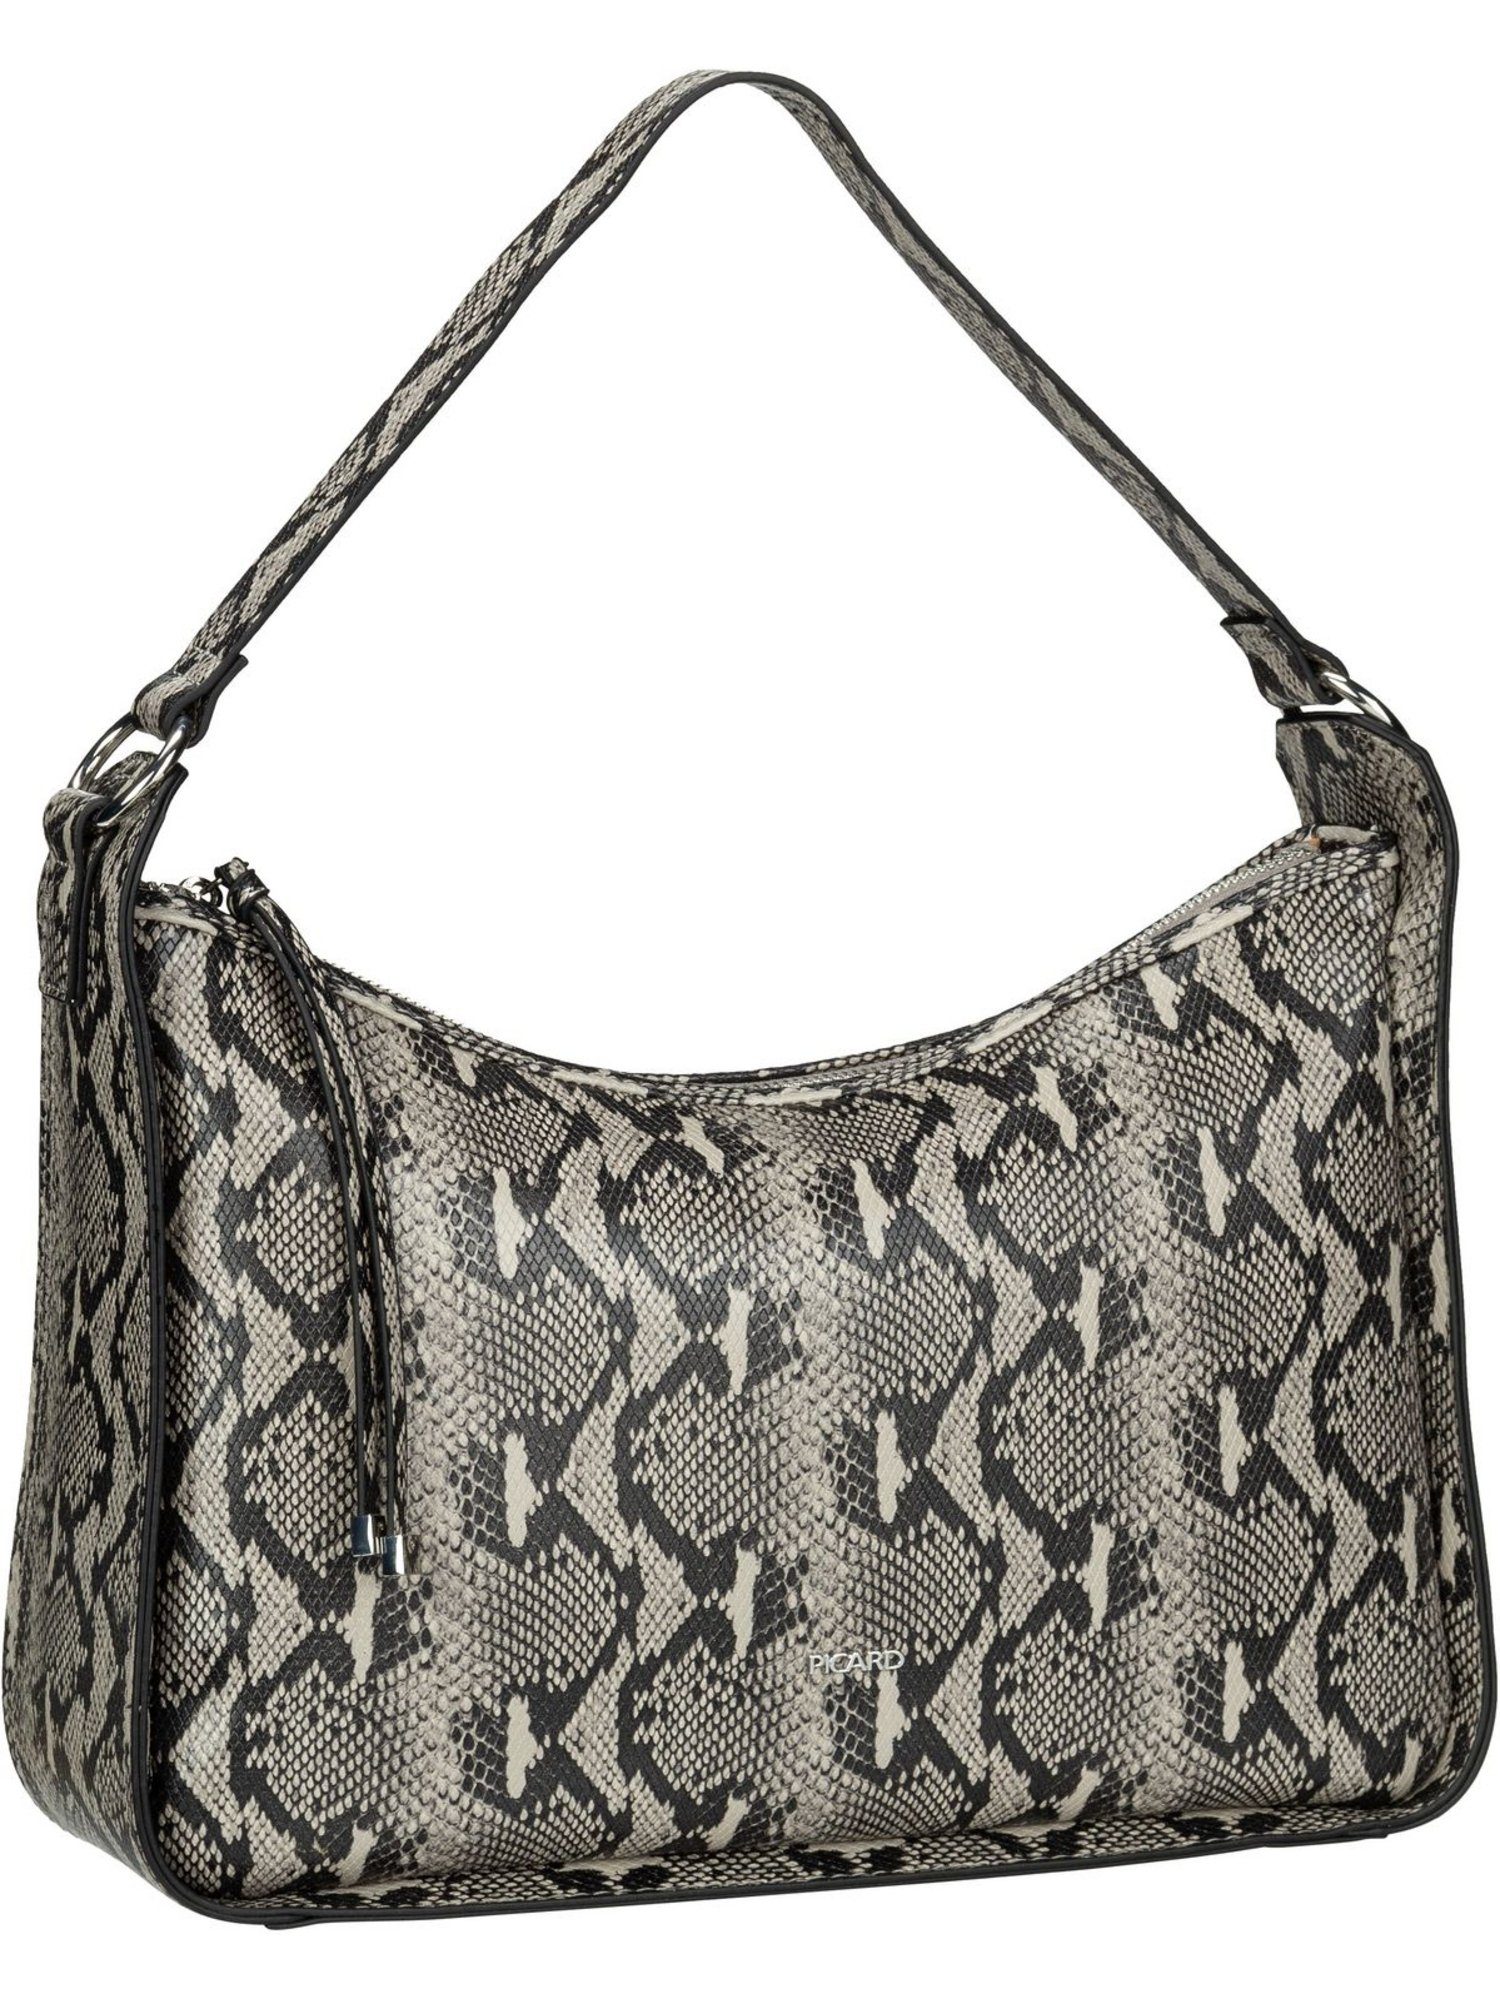 Picard Schultertasche Snake 3128 Forever